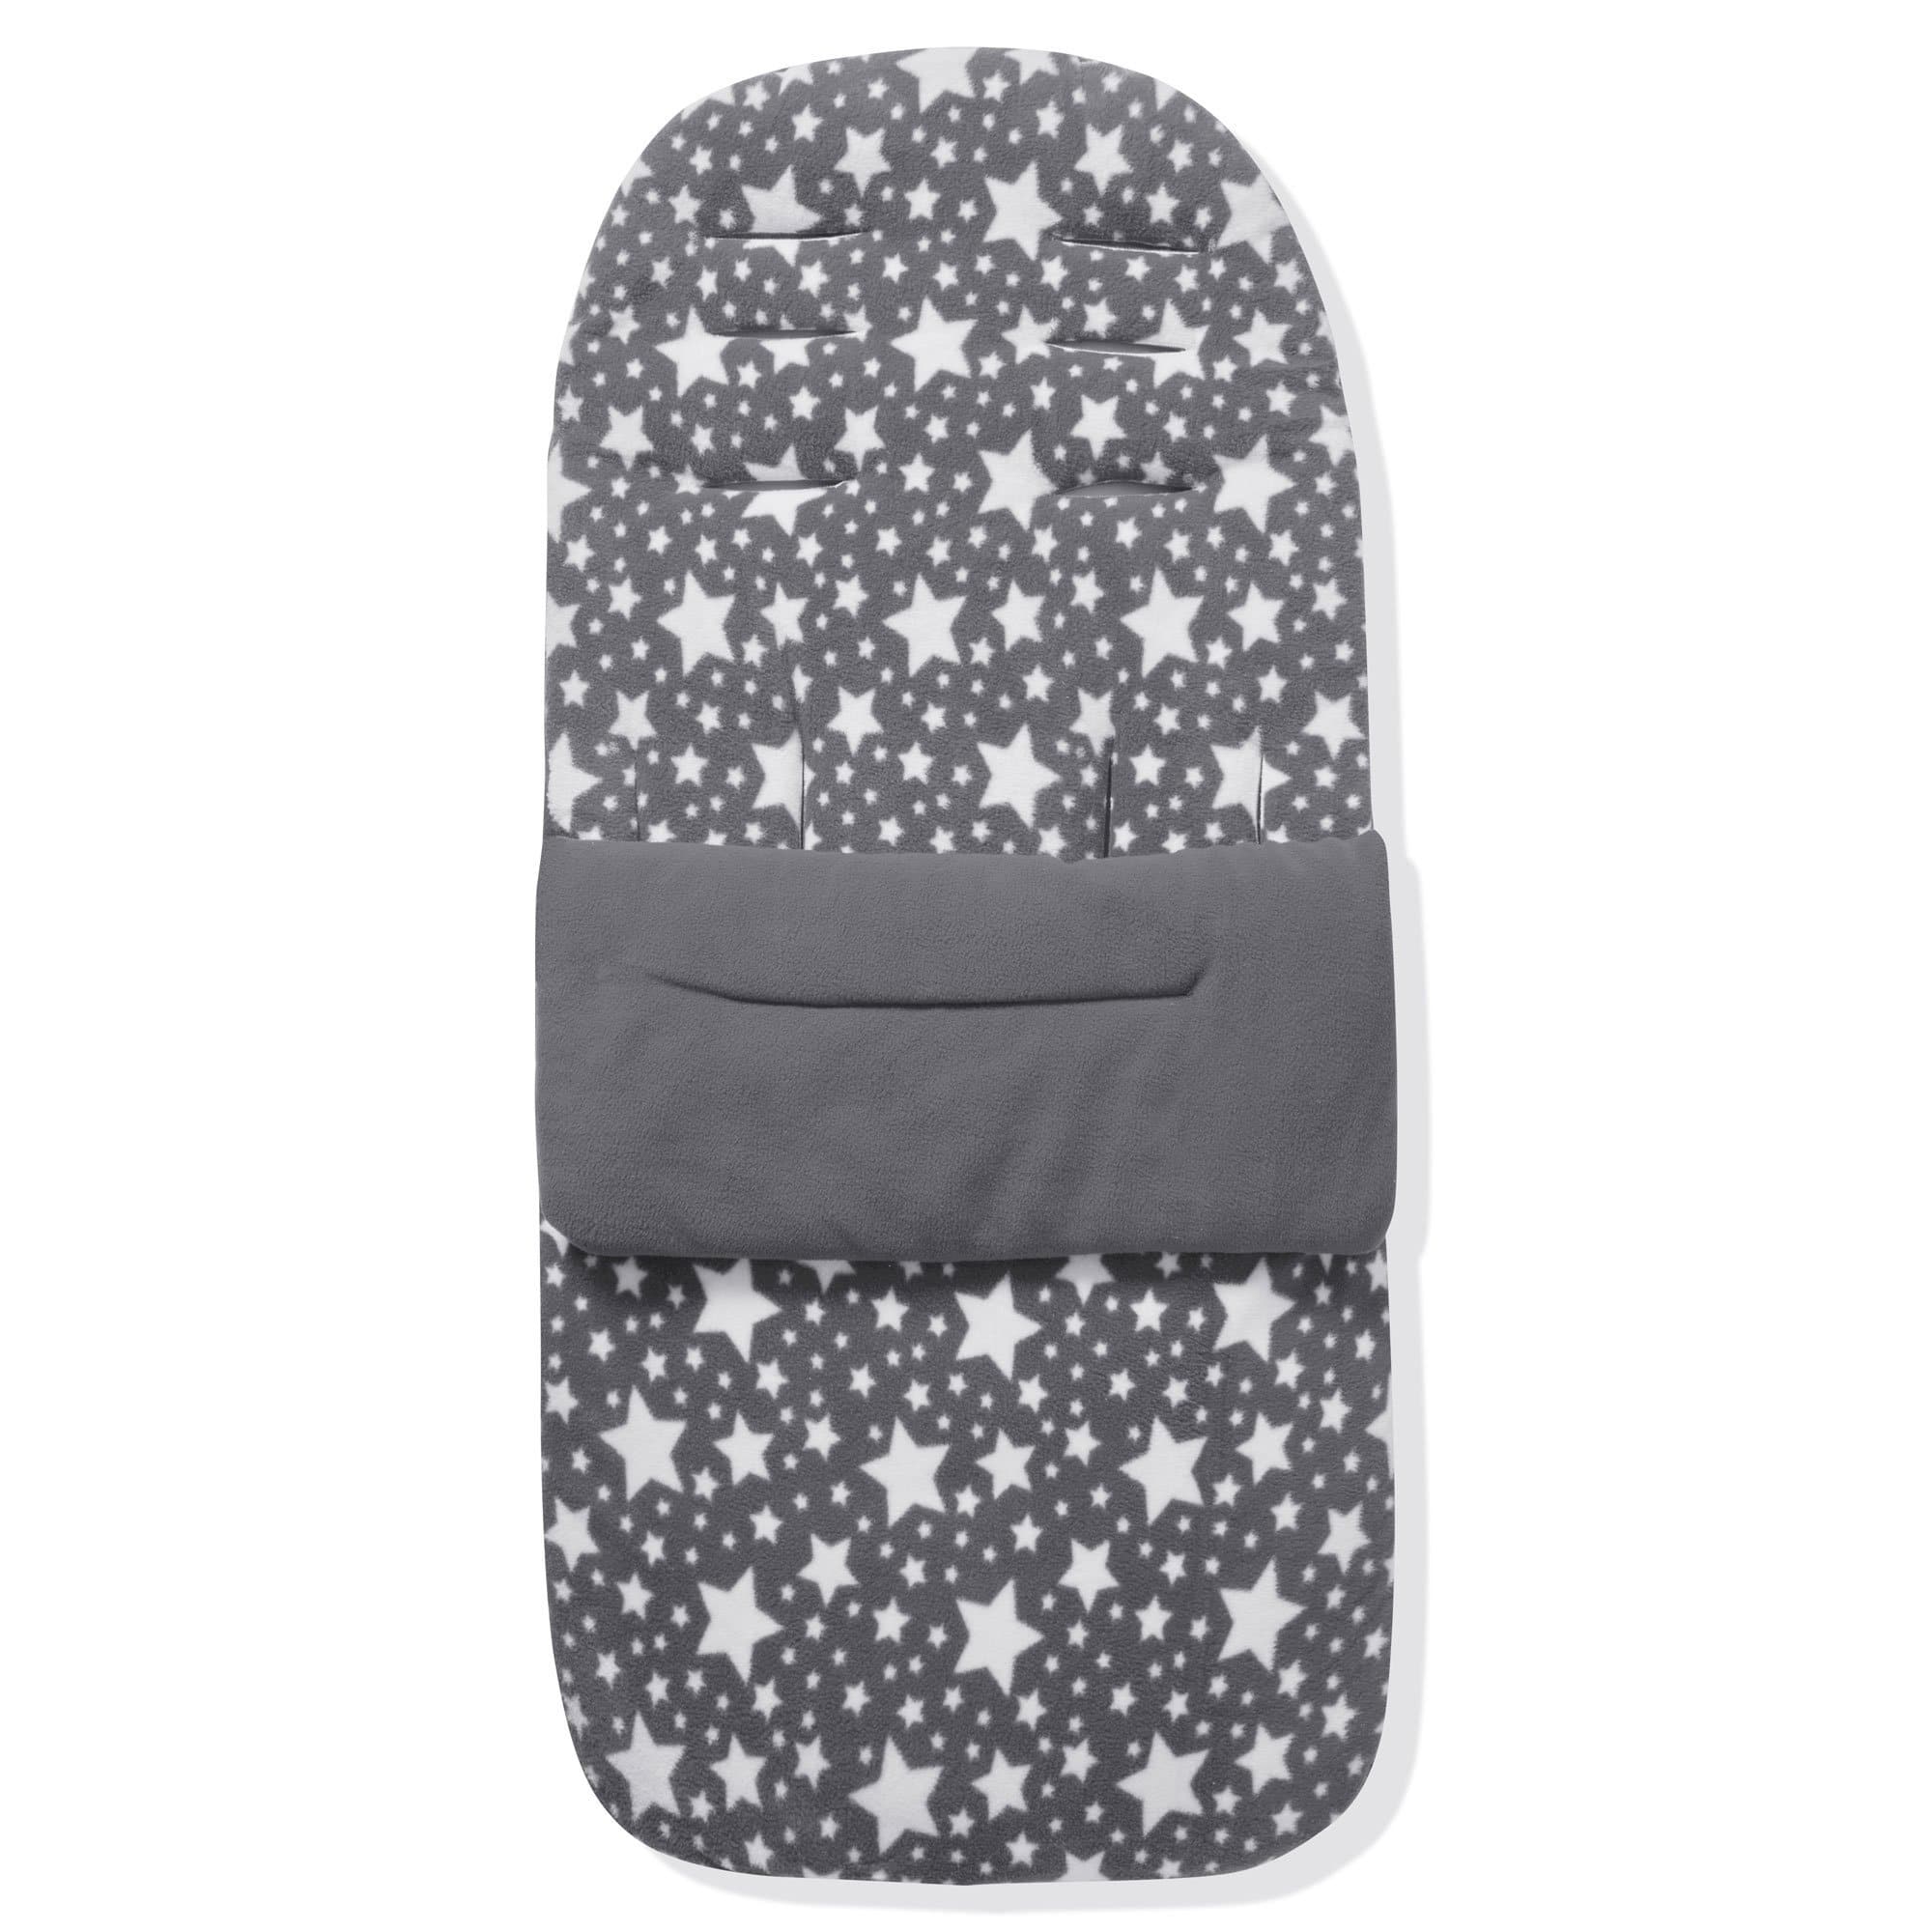 Fleece Footmuff / Cosy Toes Compatible with Mima - For Your Little One